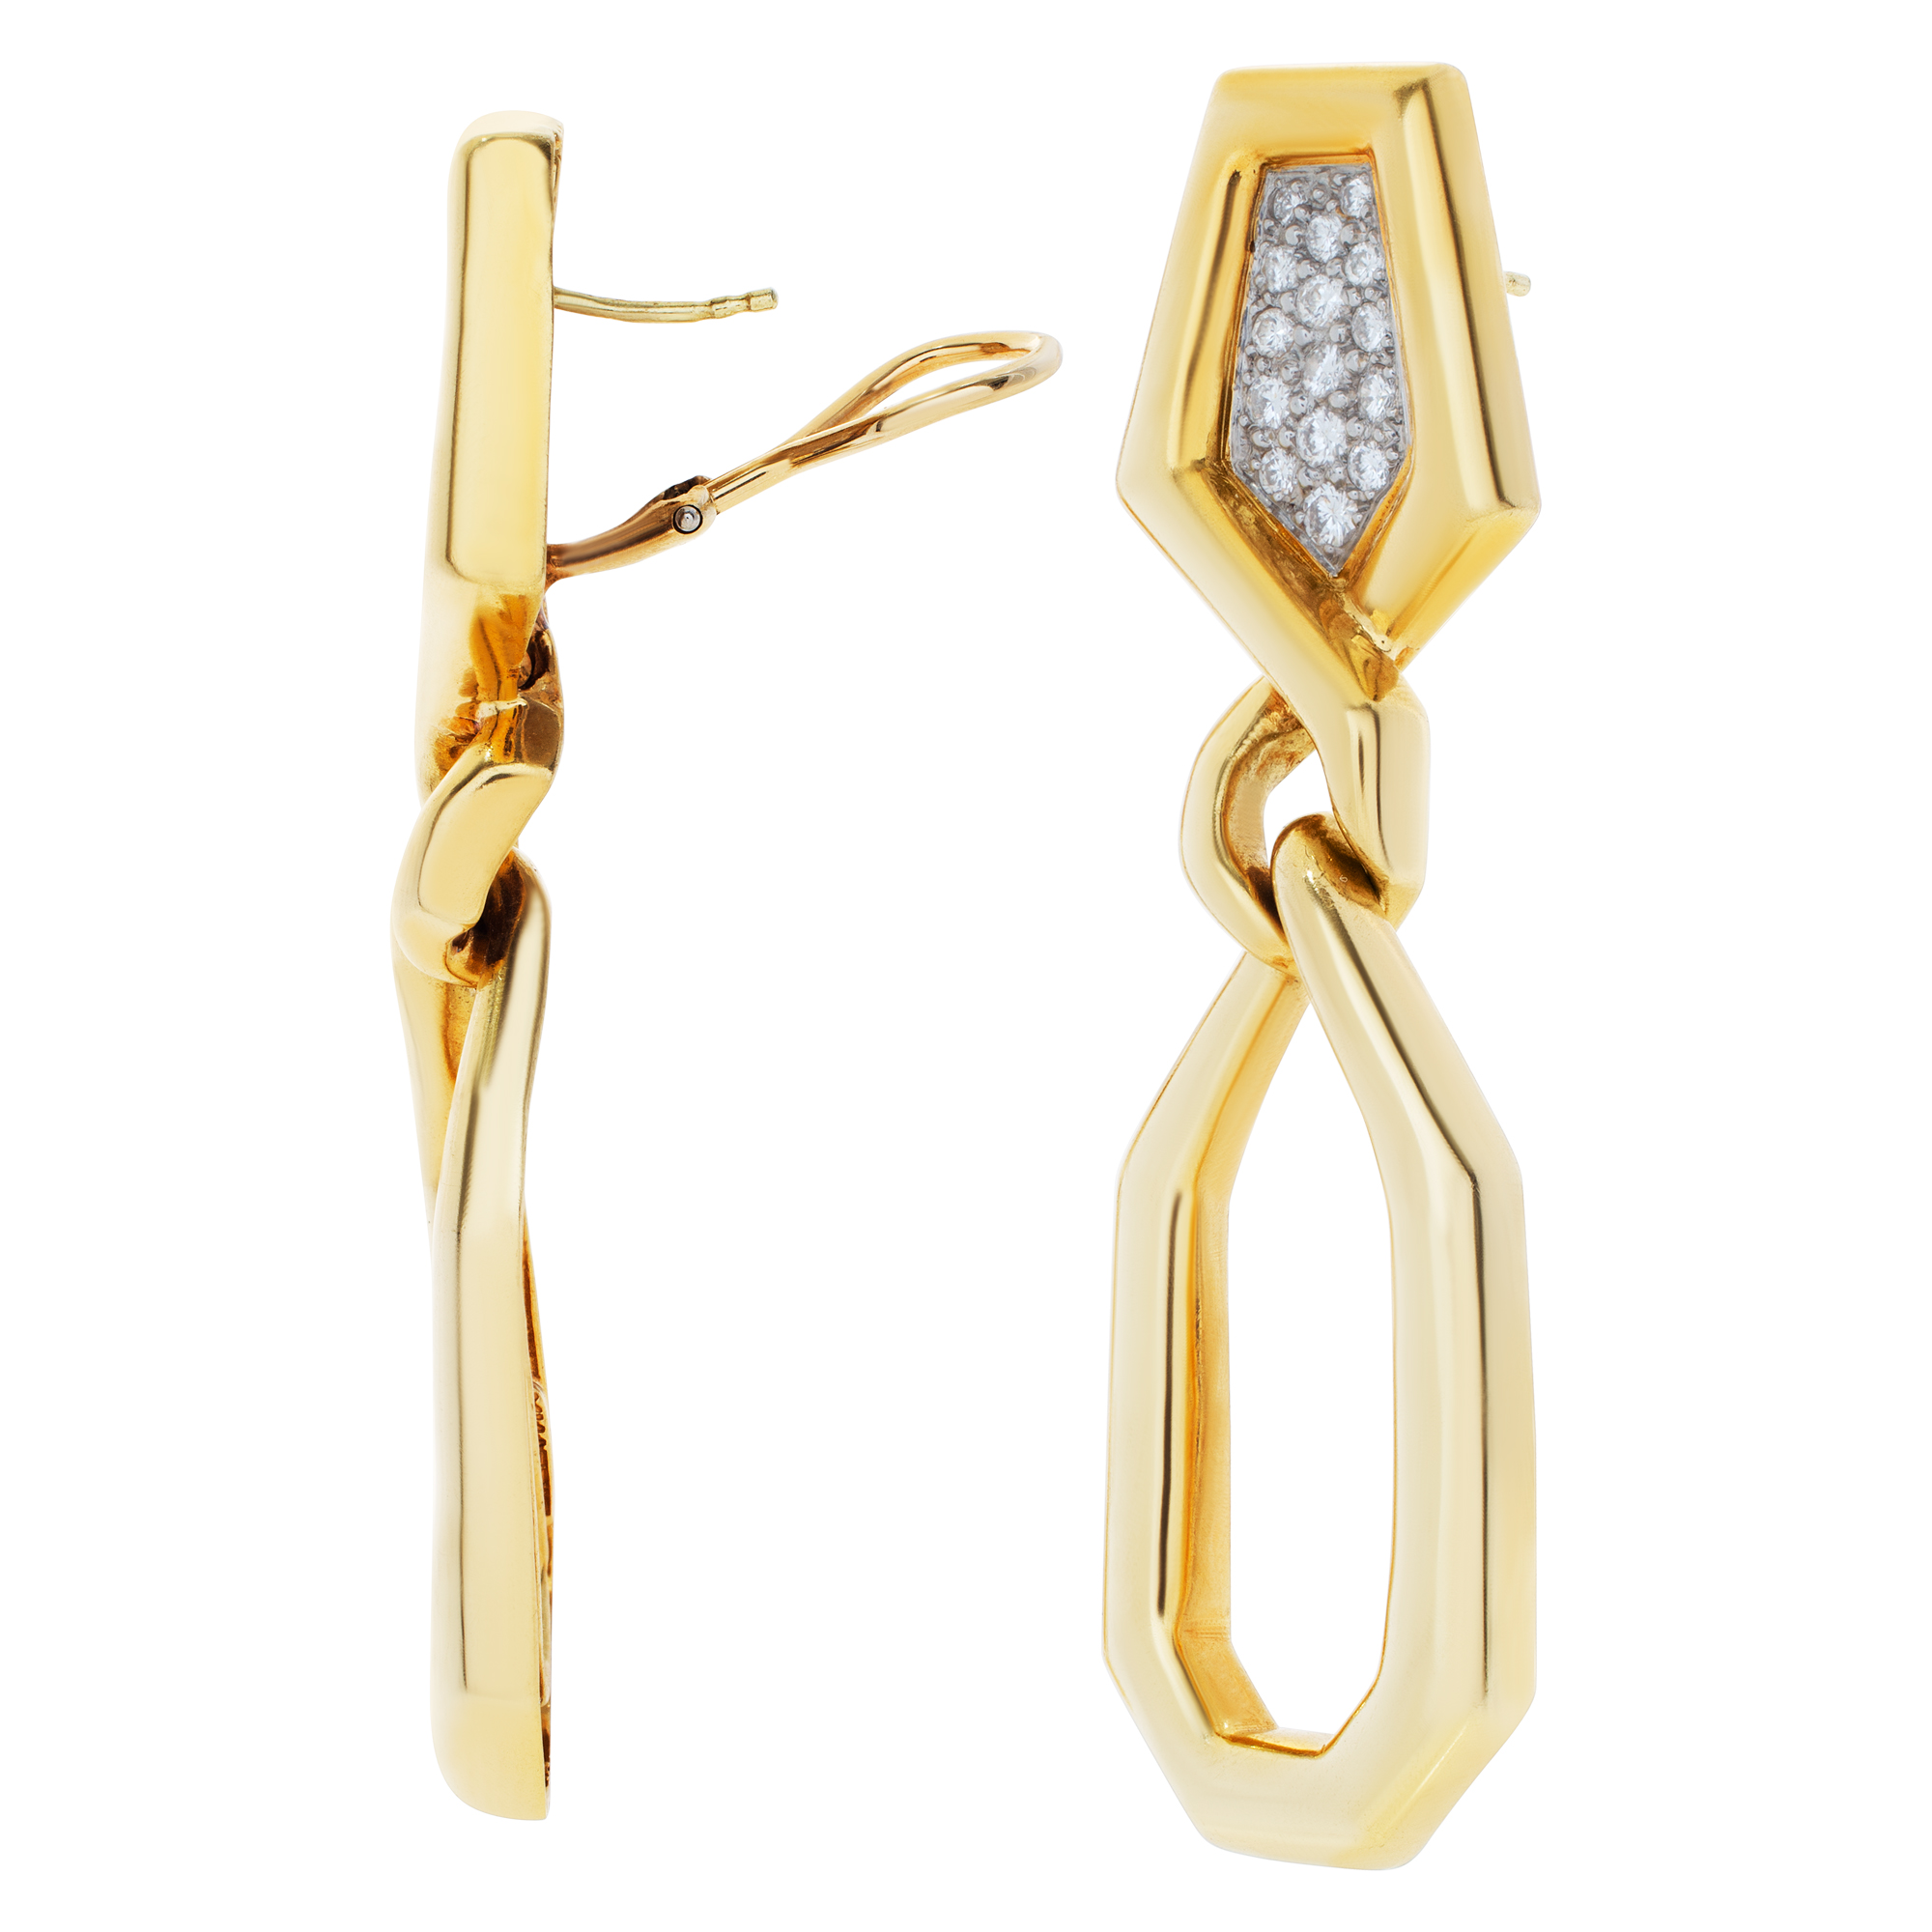 Stunning drop earrings with approx. 1 carat full cut round brilliant d